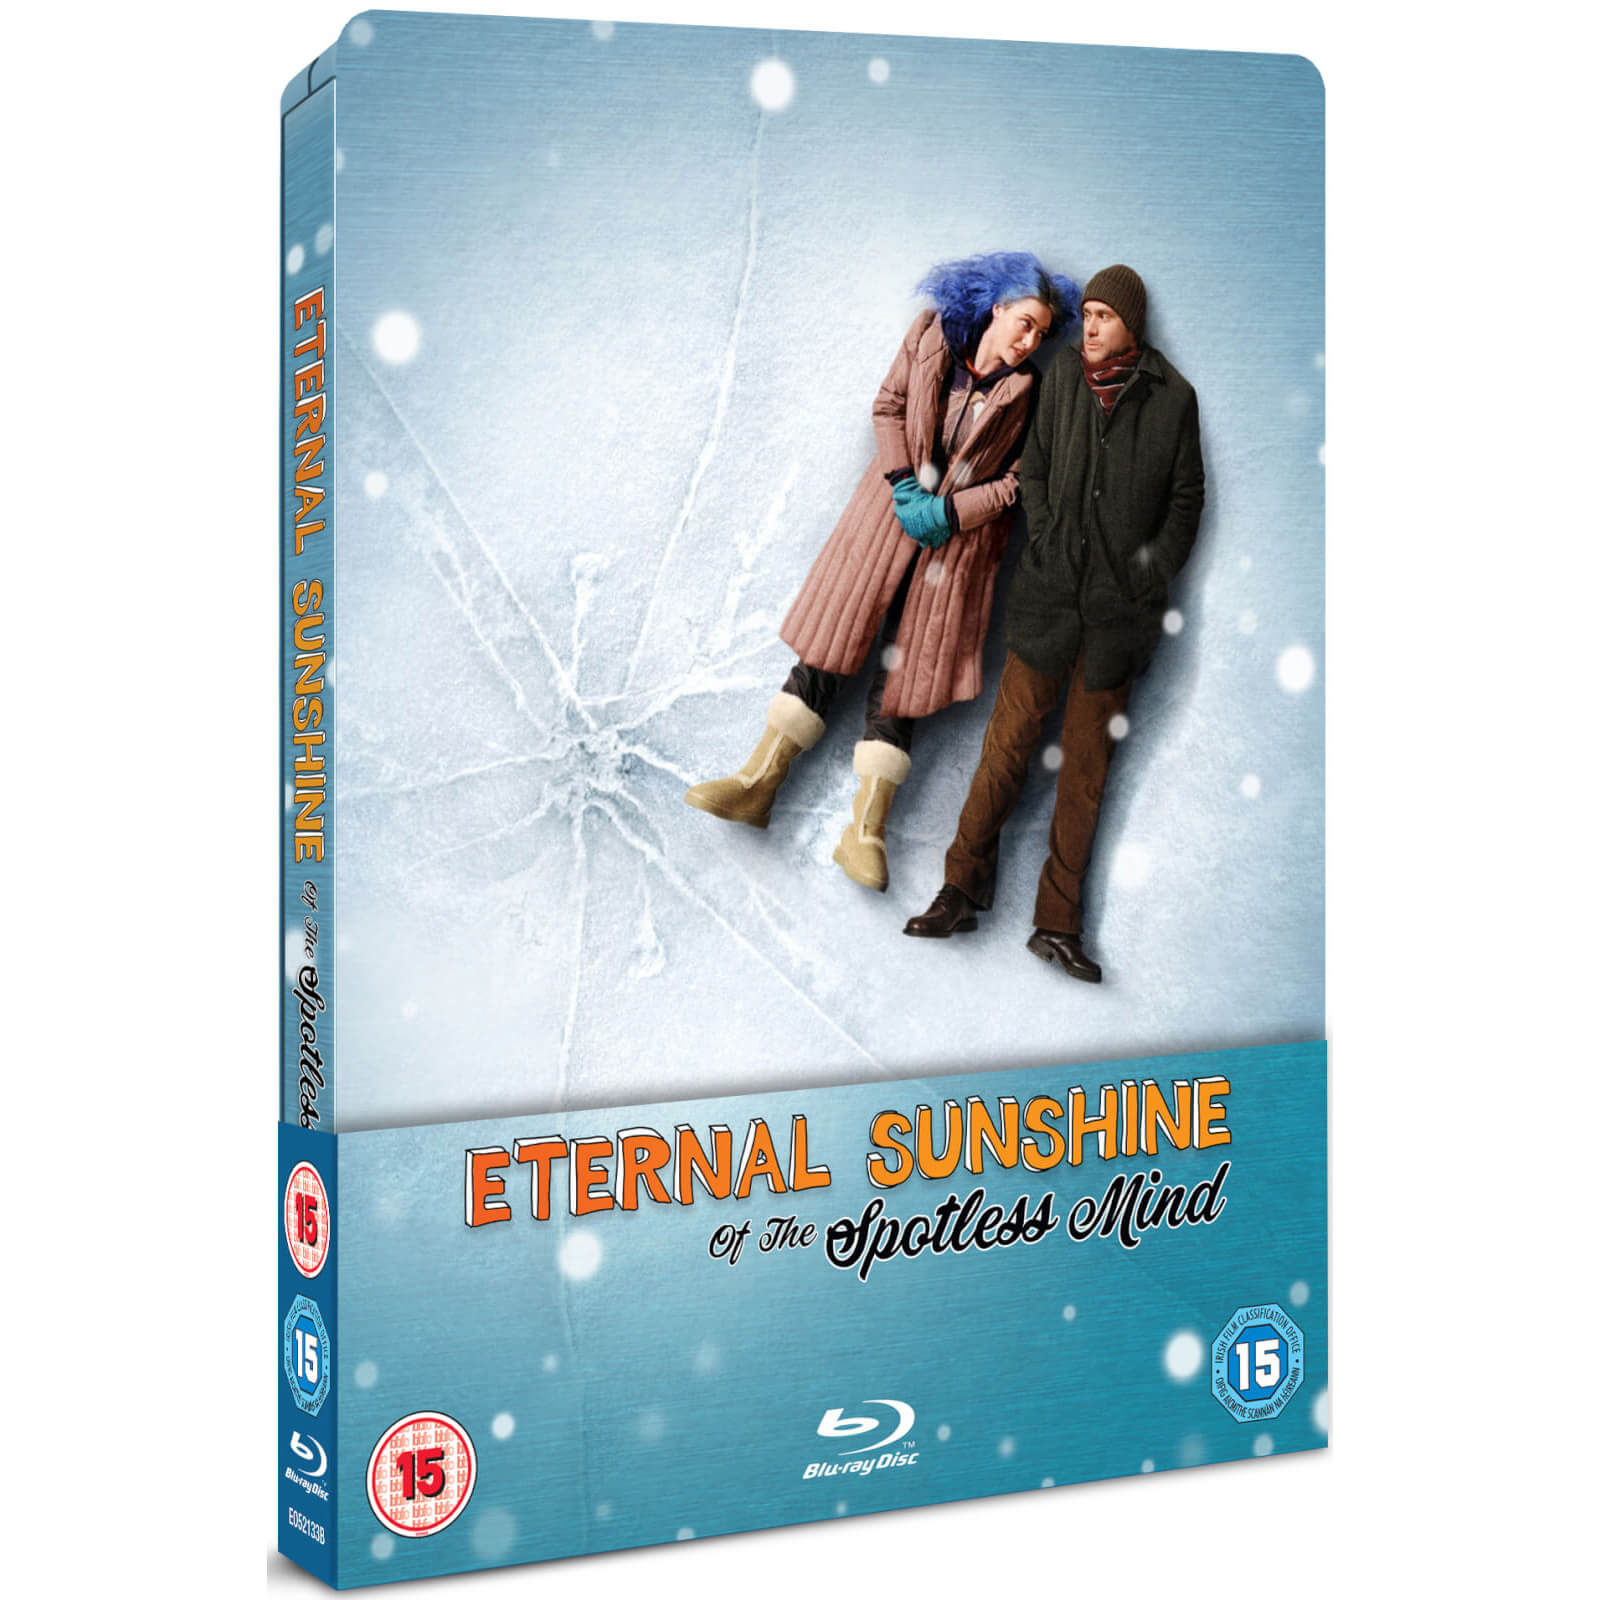 

Eternal Sunshine of the Spotless Mind - Steelbook Exclusif Édition Limitée